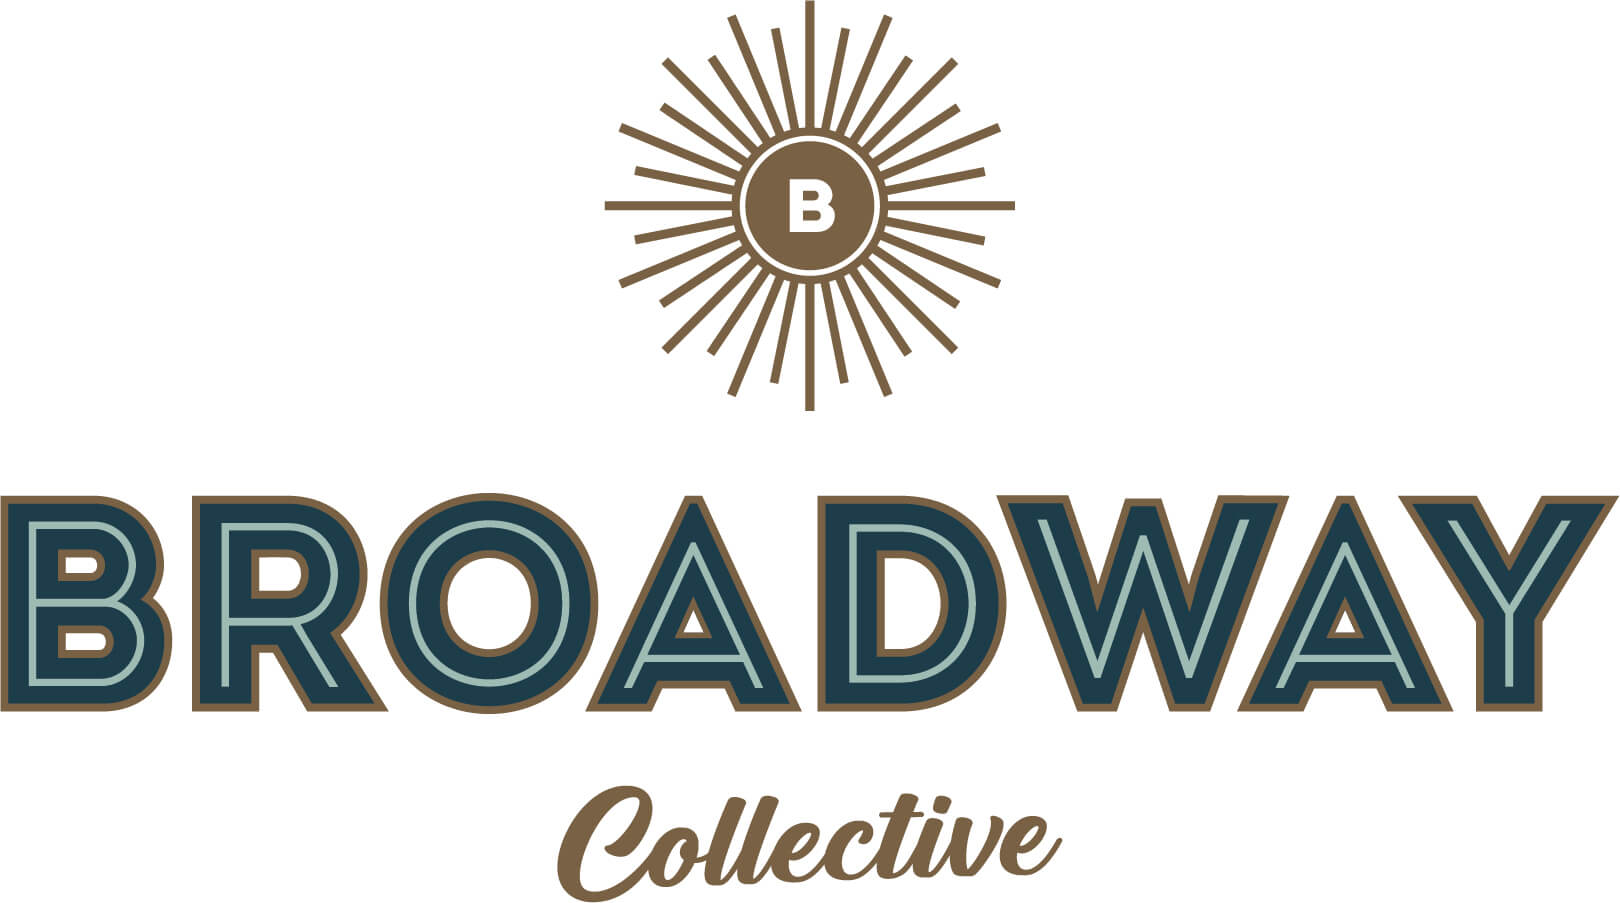 Broadway Collective